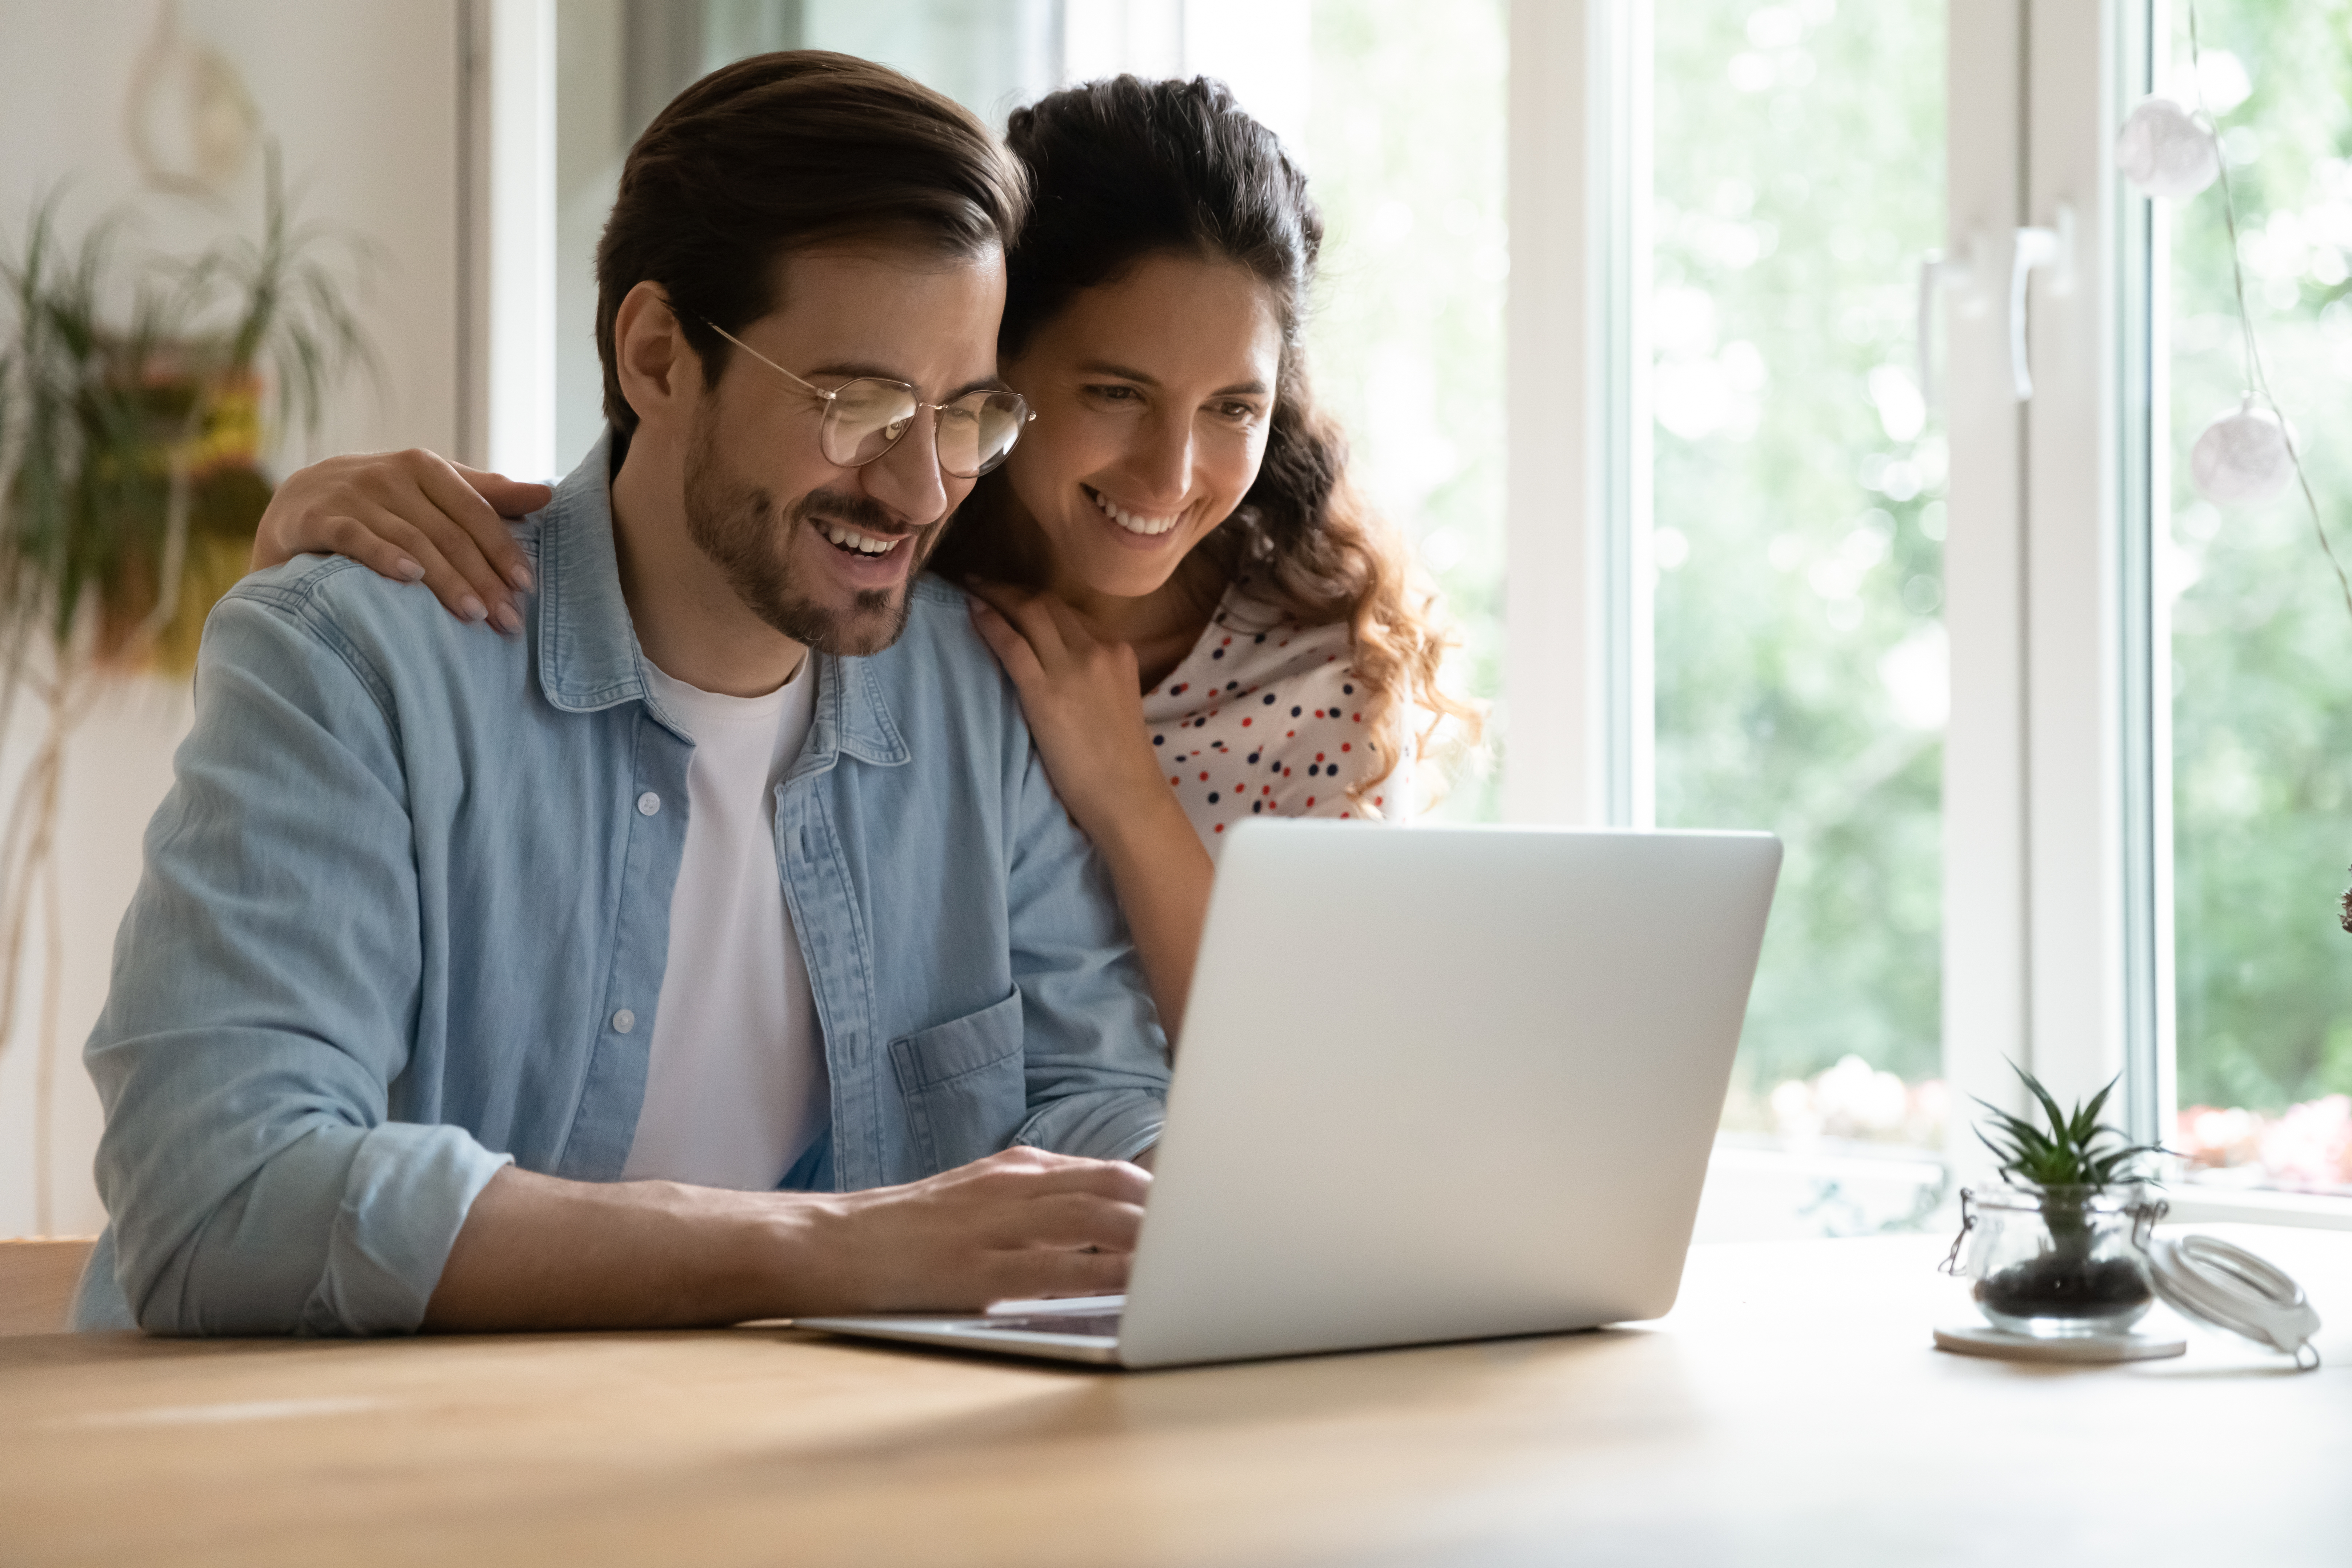 Couple smiling looking at a laptop together